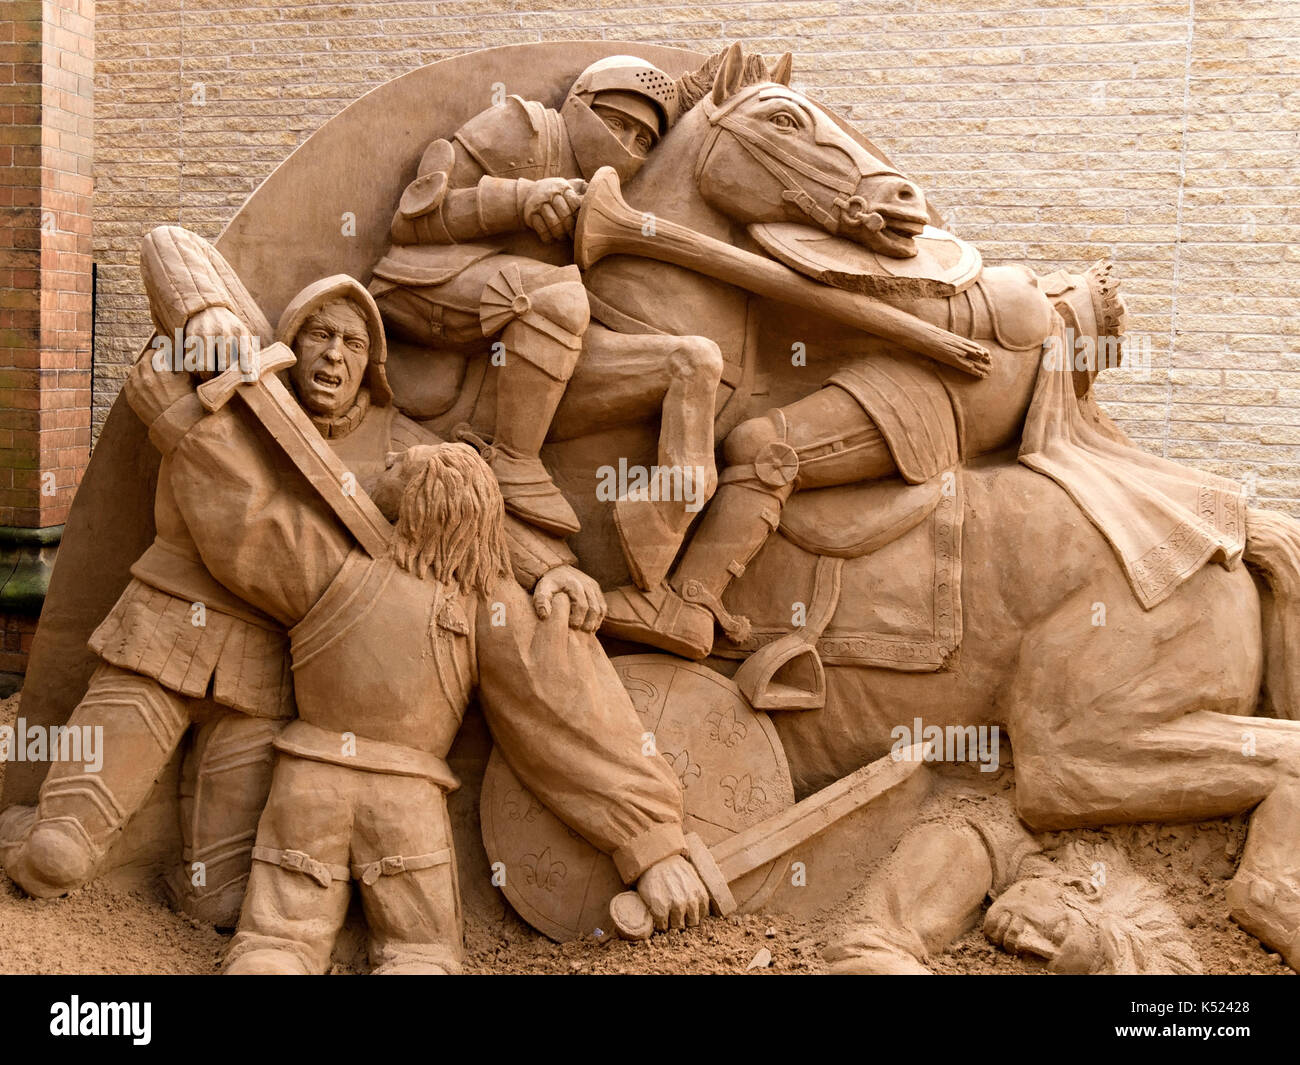 Sand sculpture depicting the Battle of Bosworth by Baldrick Buckle on display at the King Richard III visitor centre in Leicester, England, UK Stock Photo